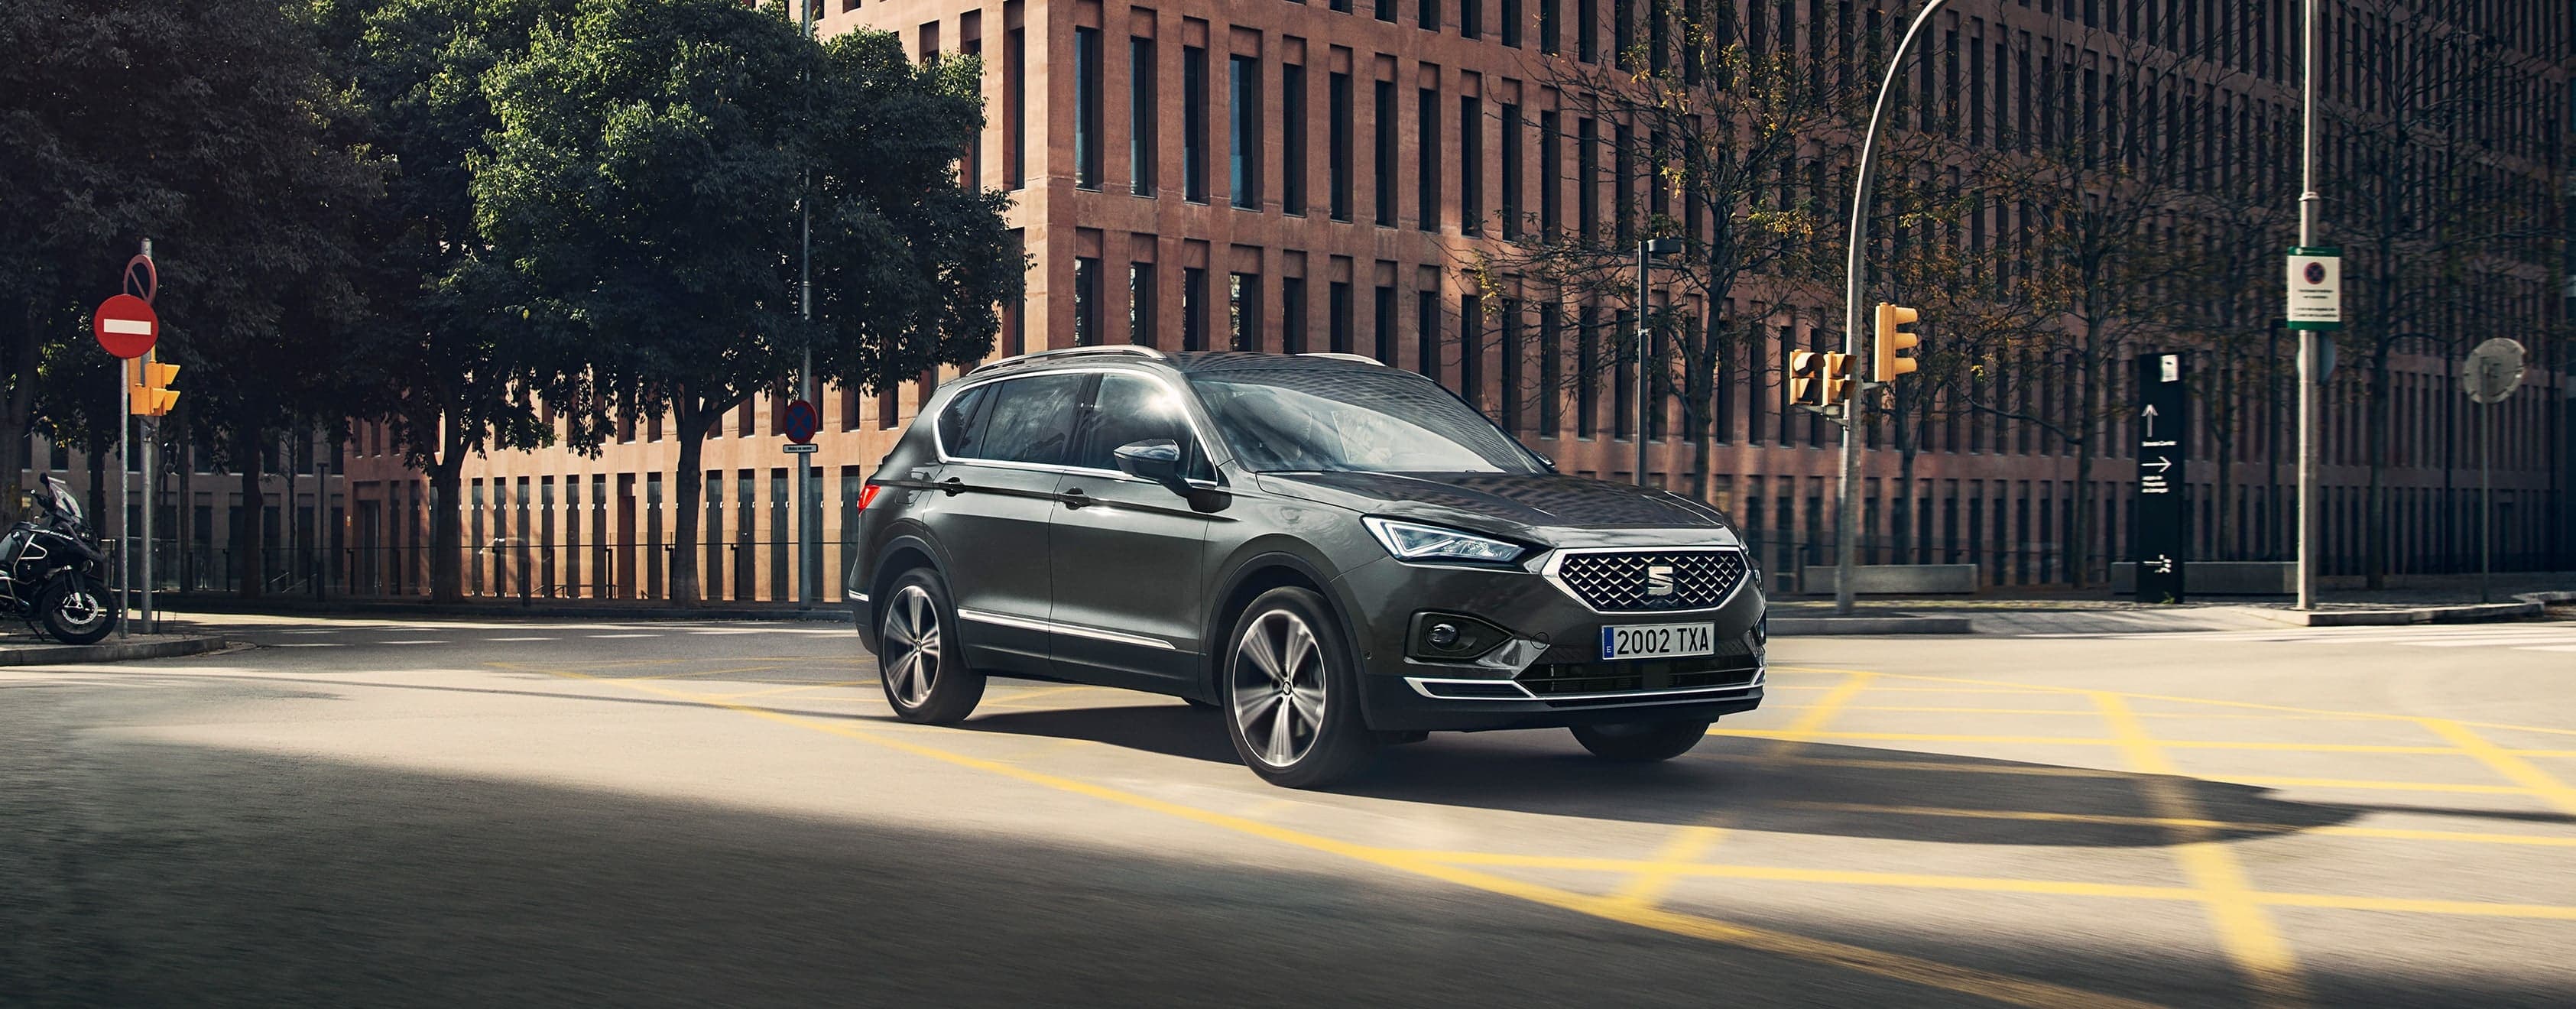 New SEAT Tarraco SUV 7 seater front view of car 